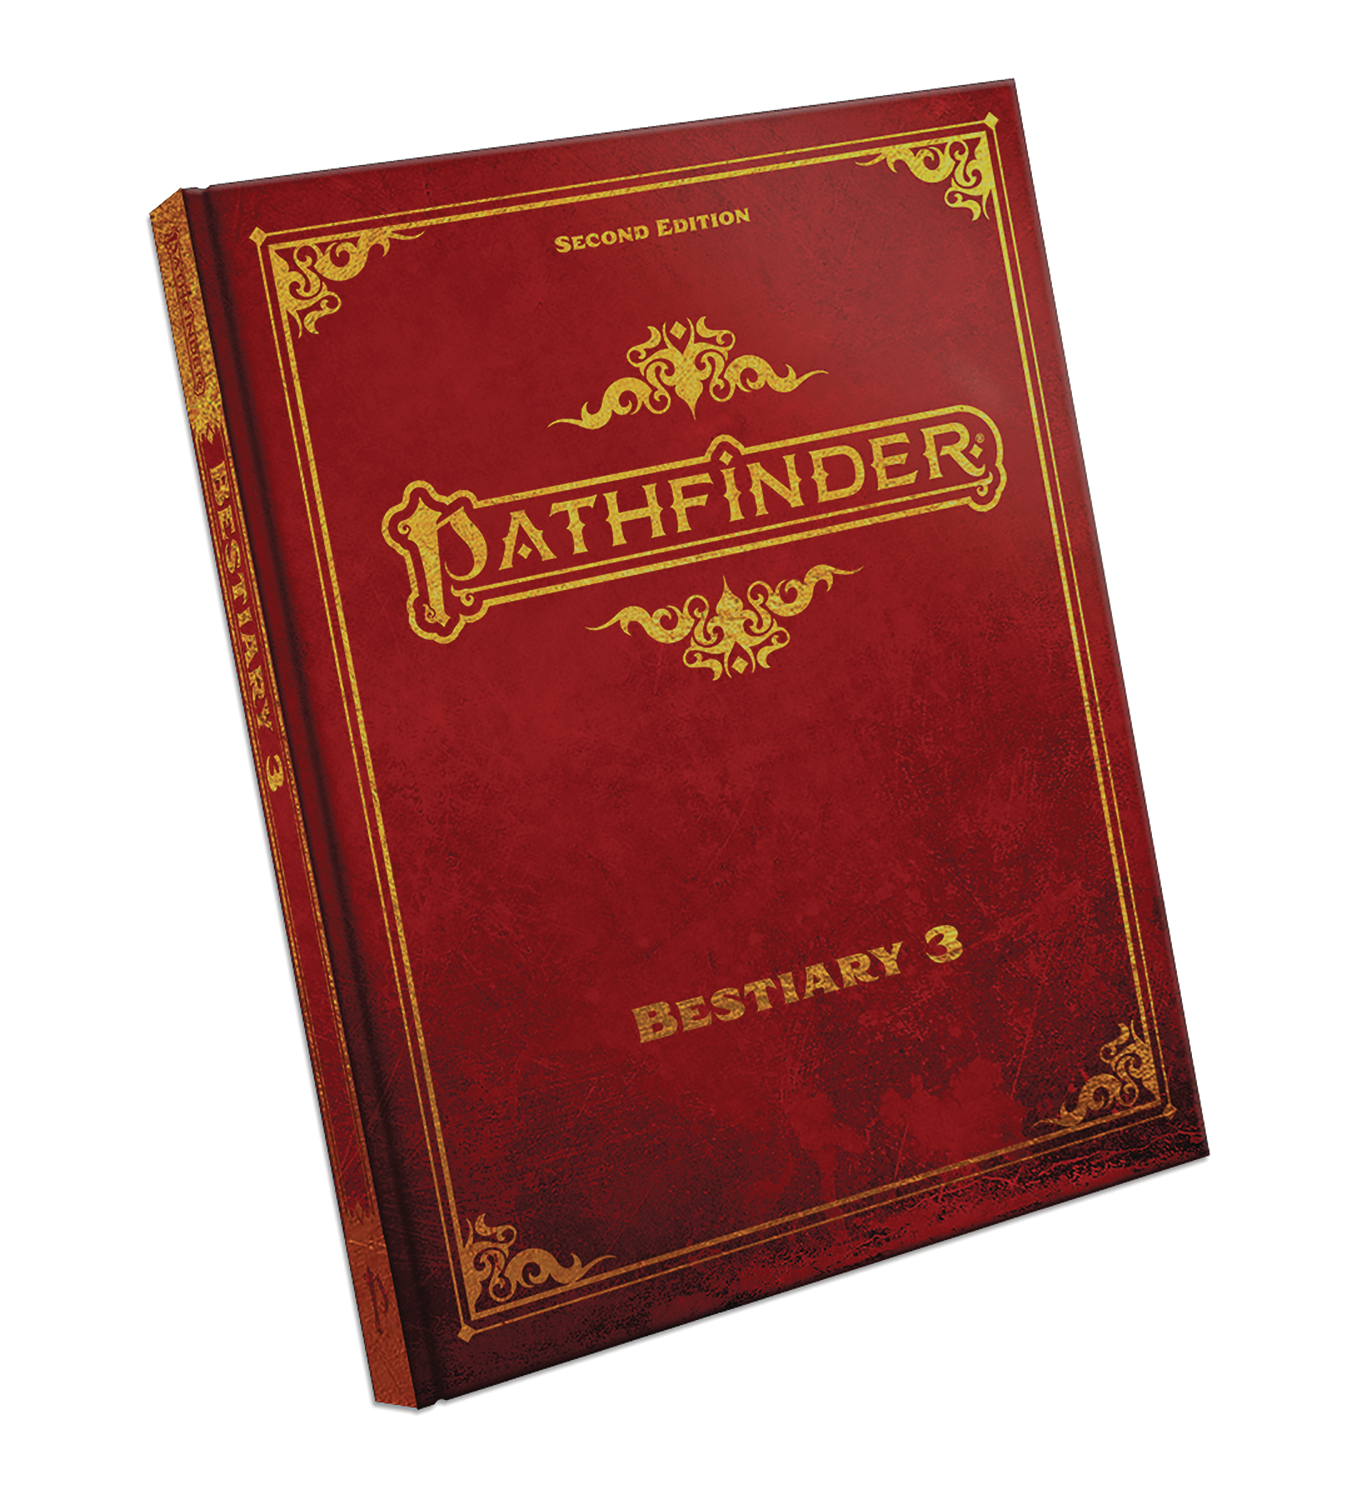 Pathfinder Bestiary 3 Hardcover Special Edition (P2)